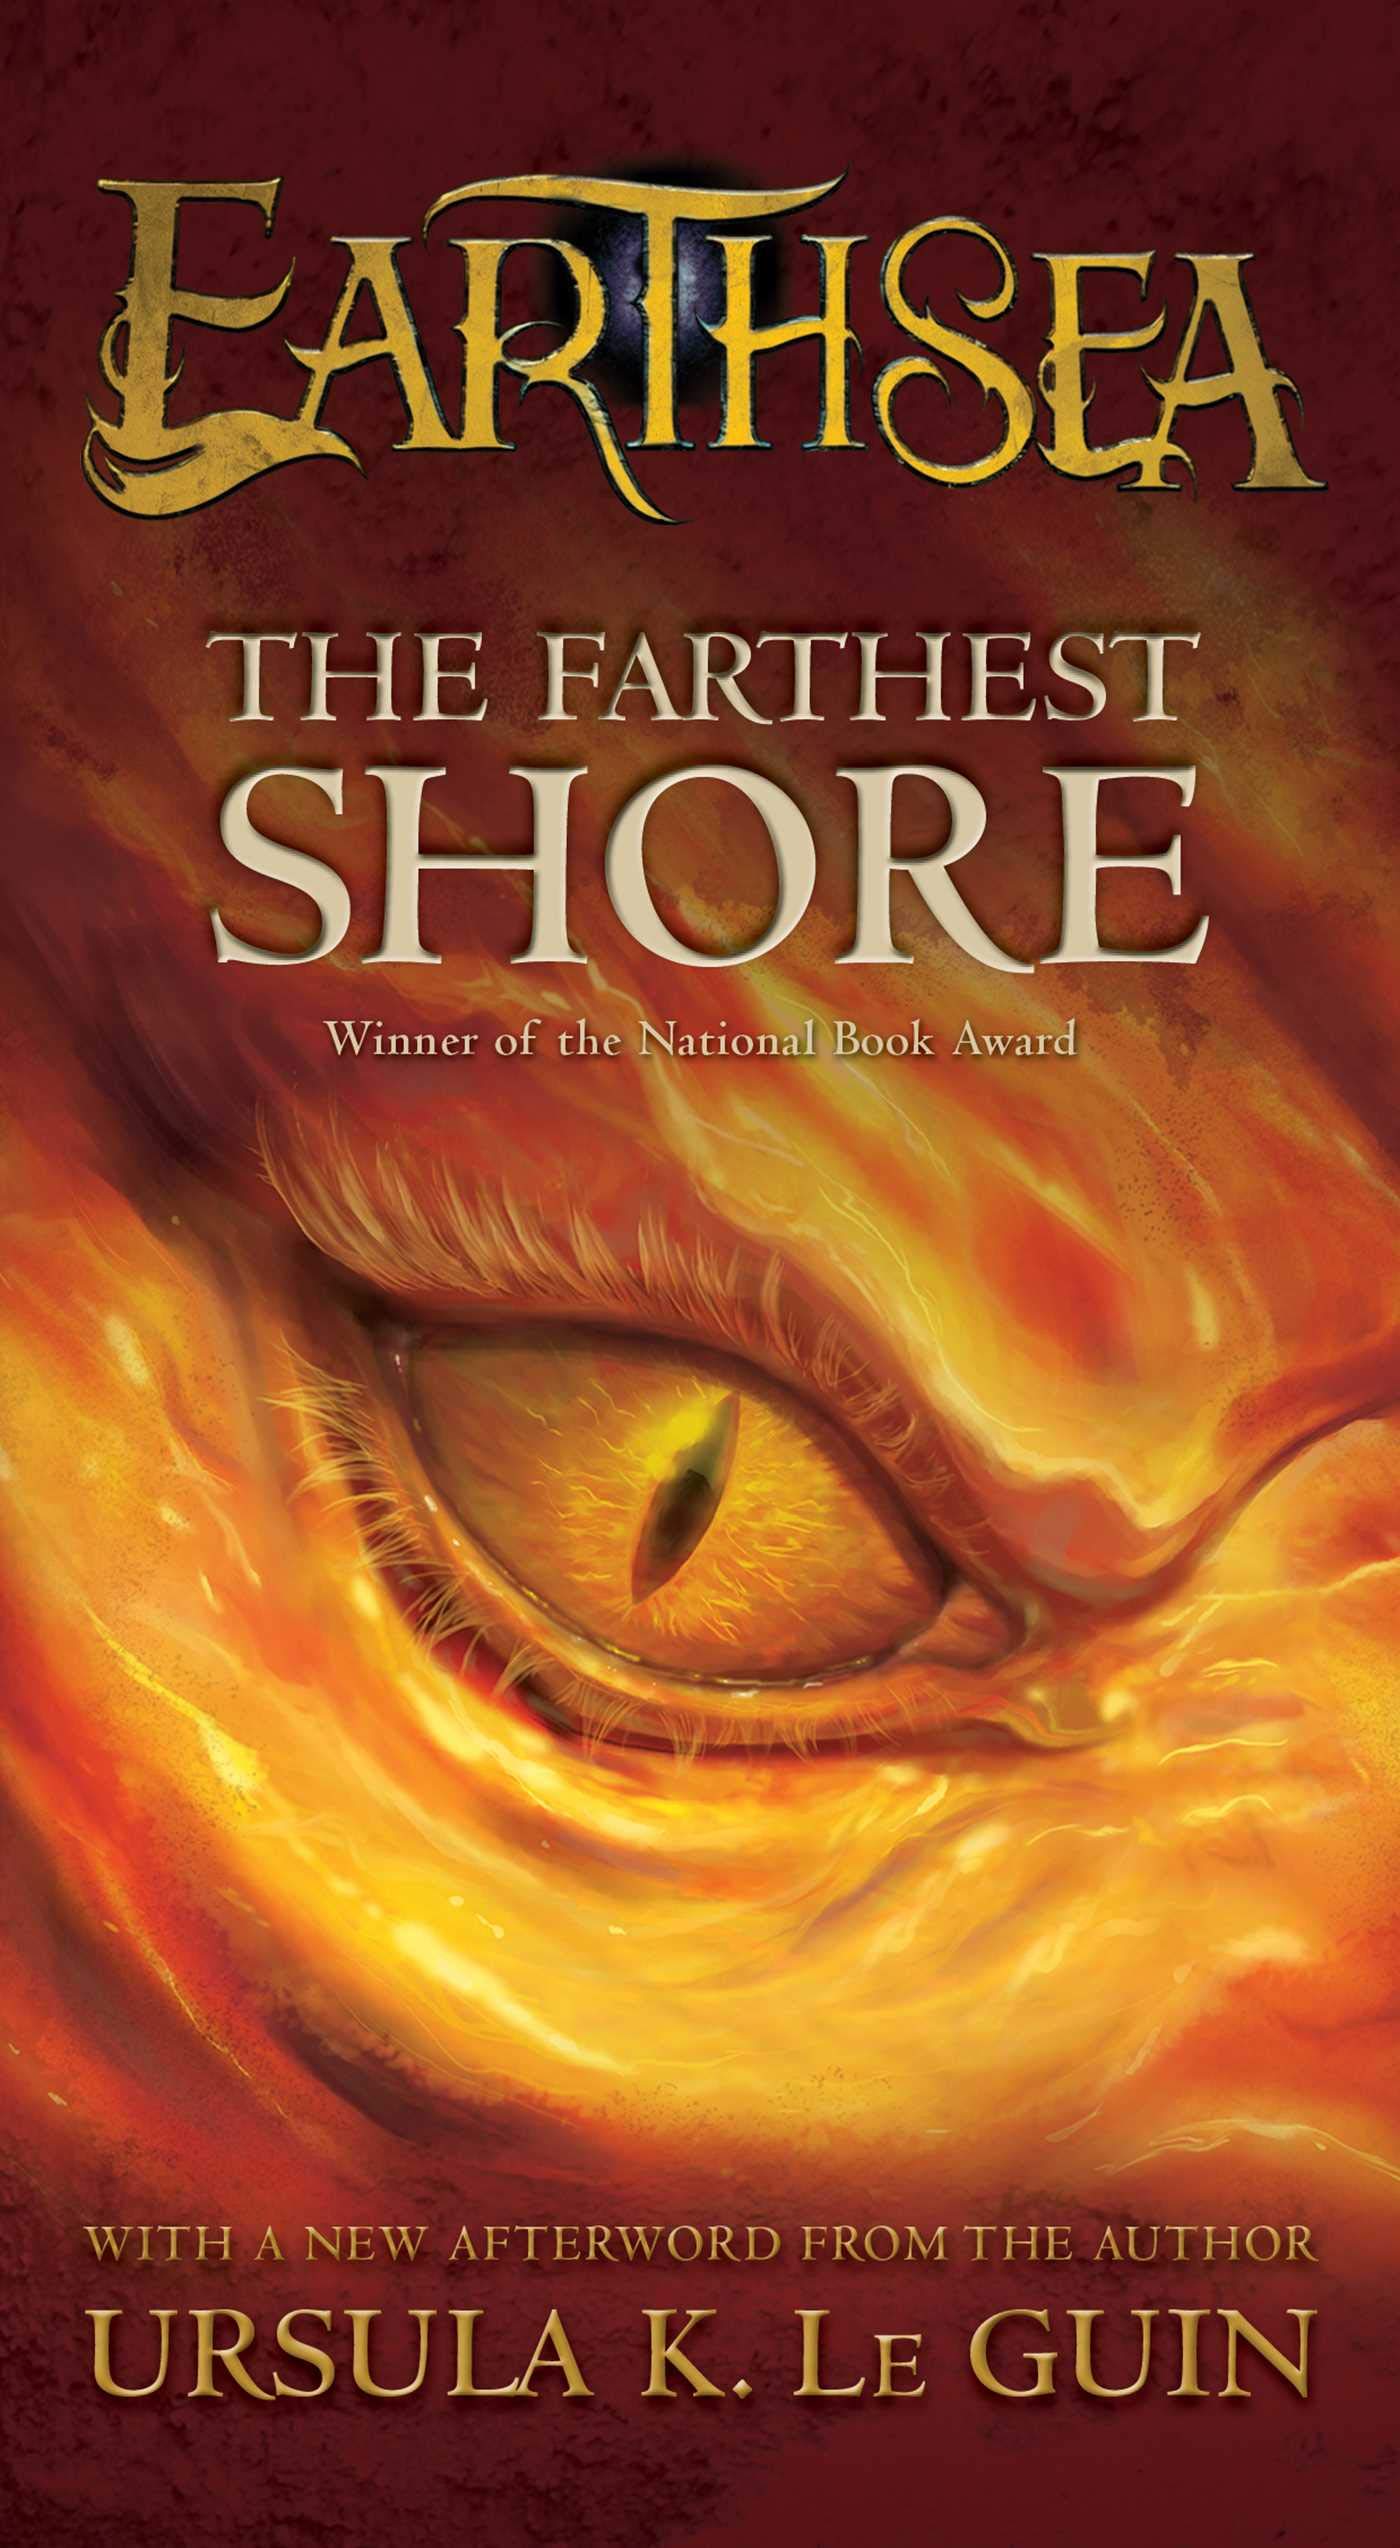 The Farthest Shore (The Earthsea Cycle Series Book 3)